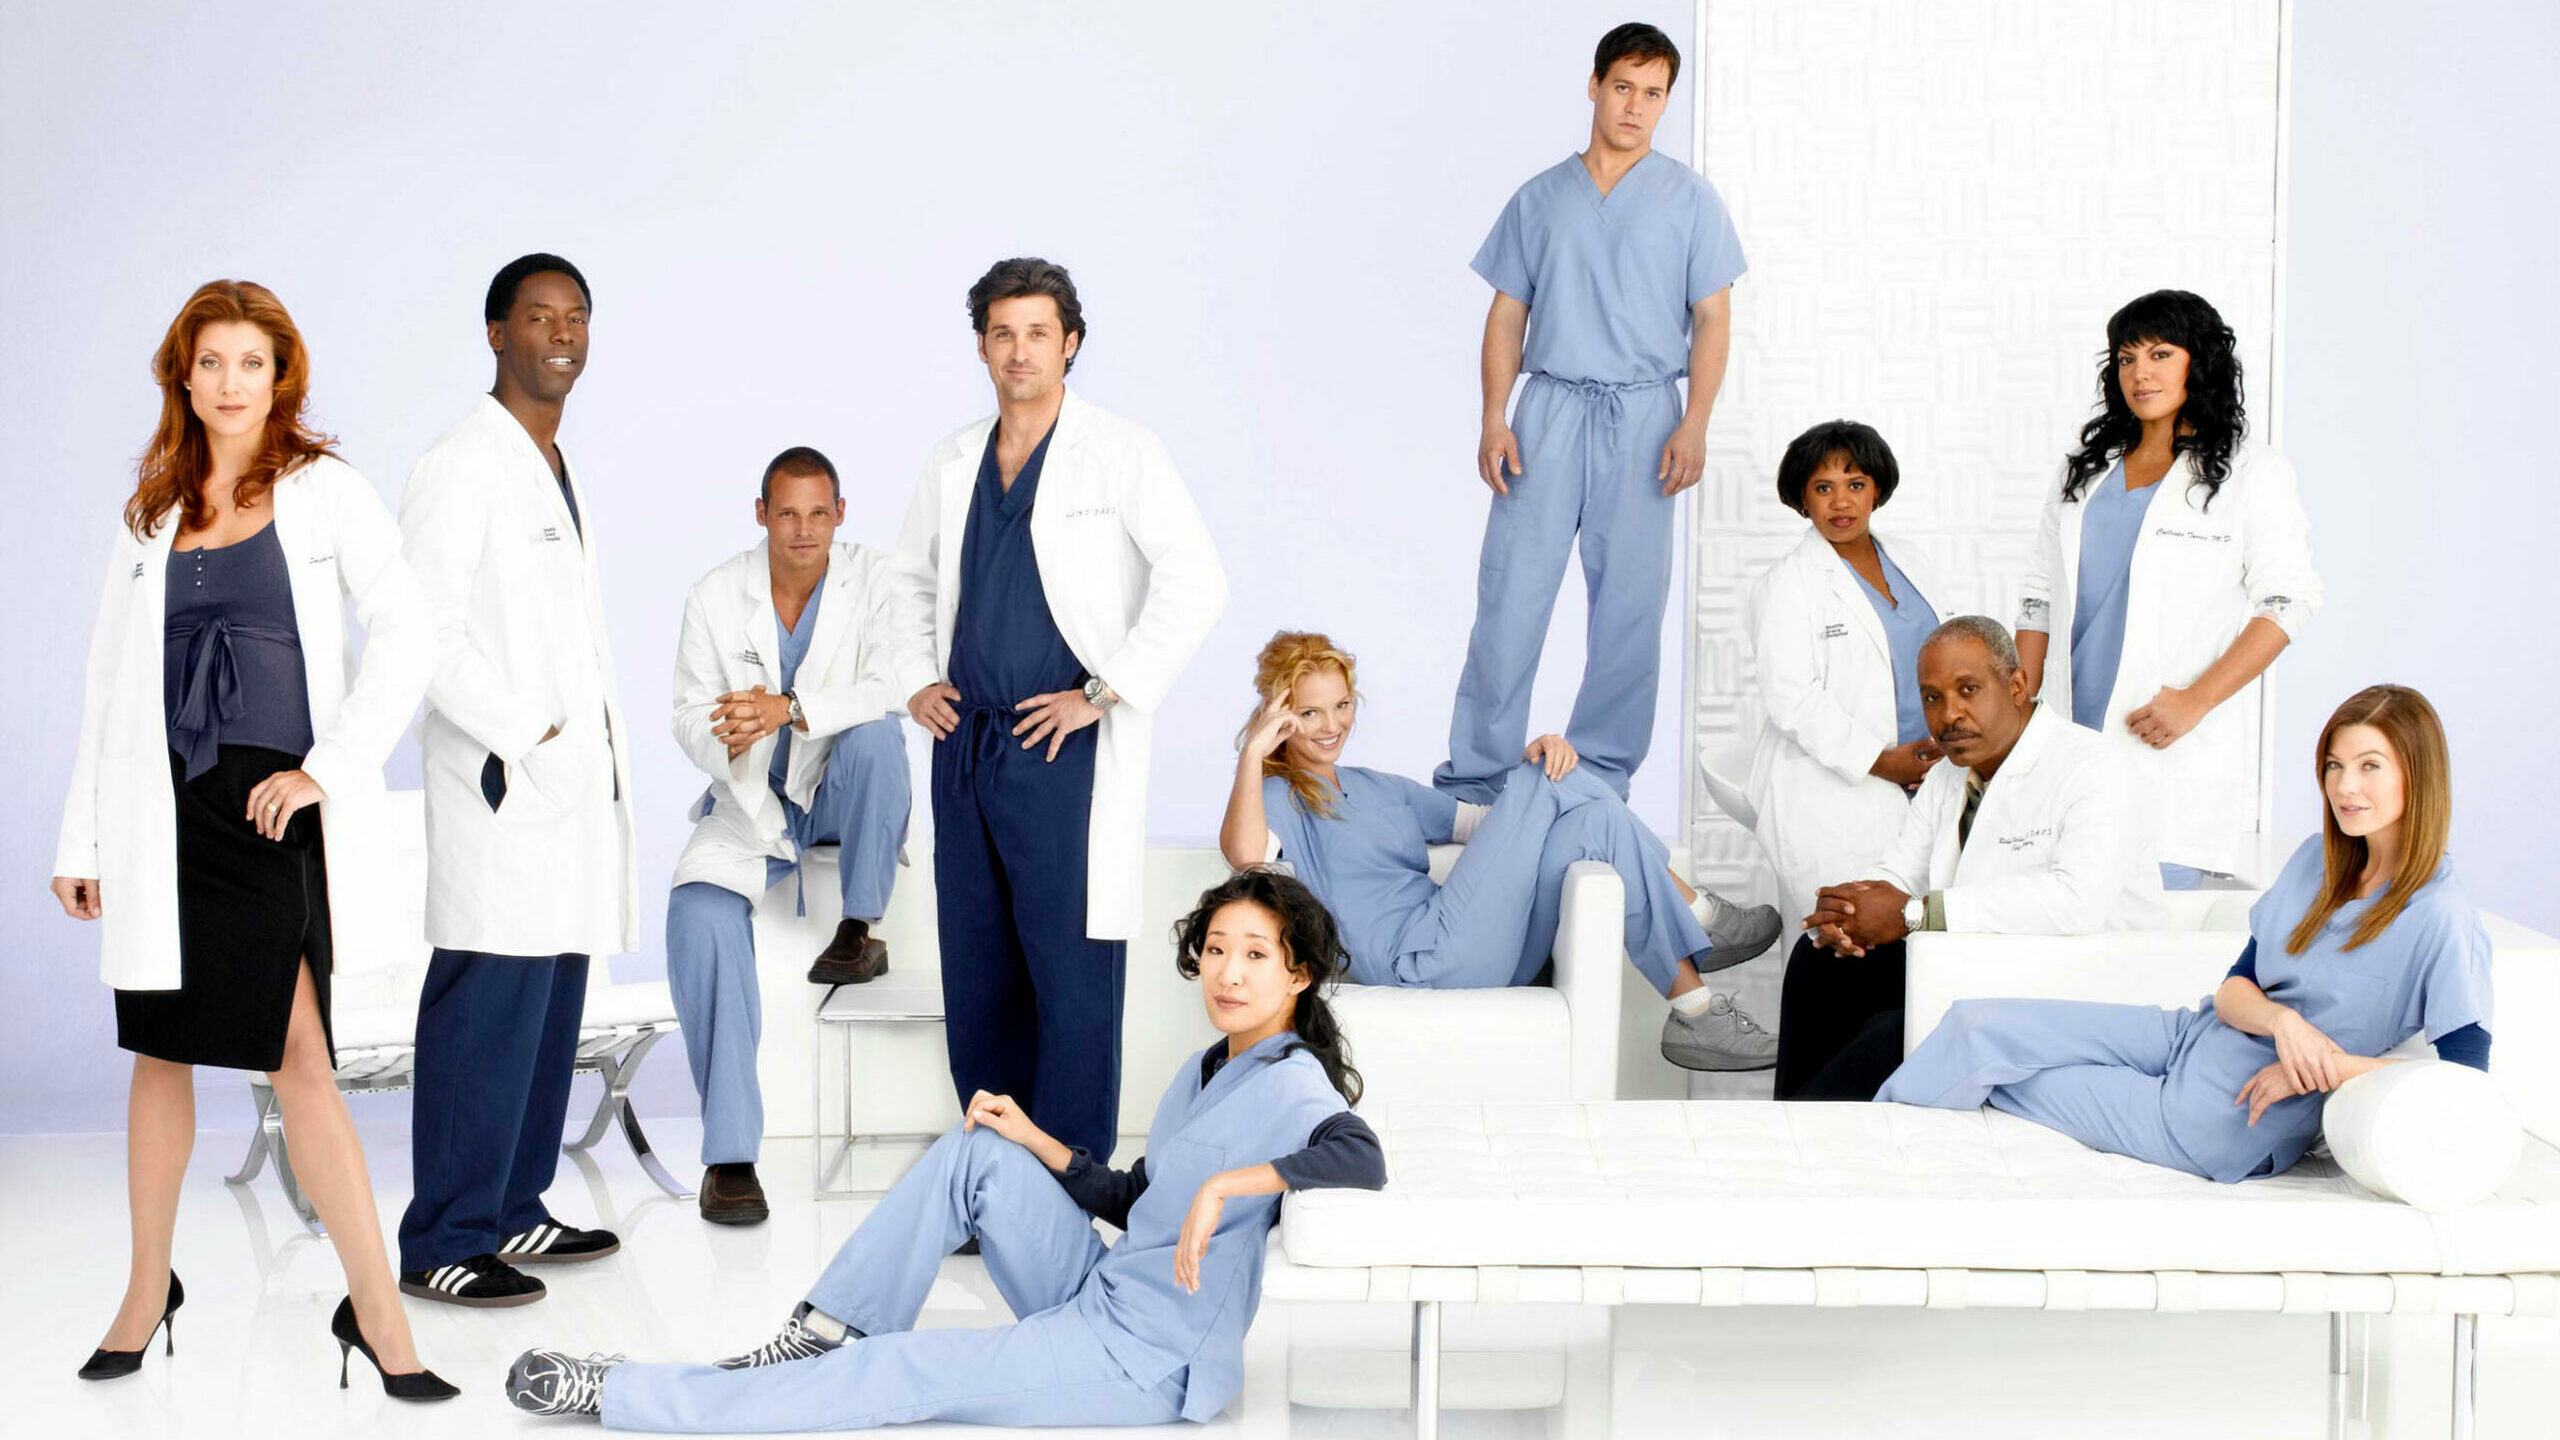 greys anatomy unboxing! which greys character would you like to